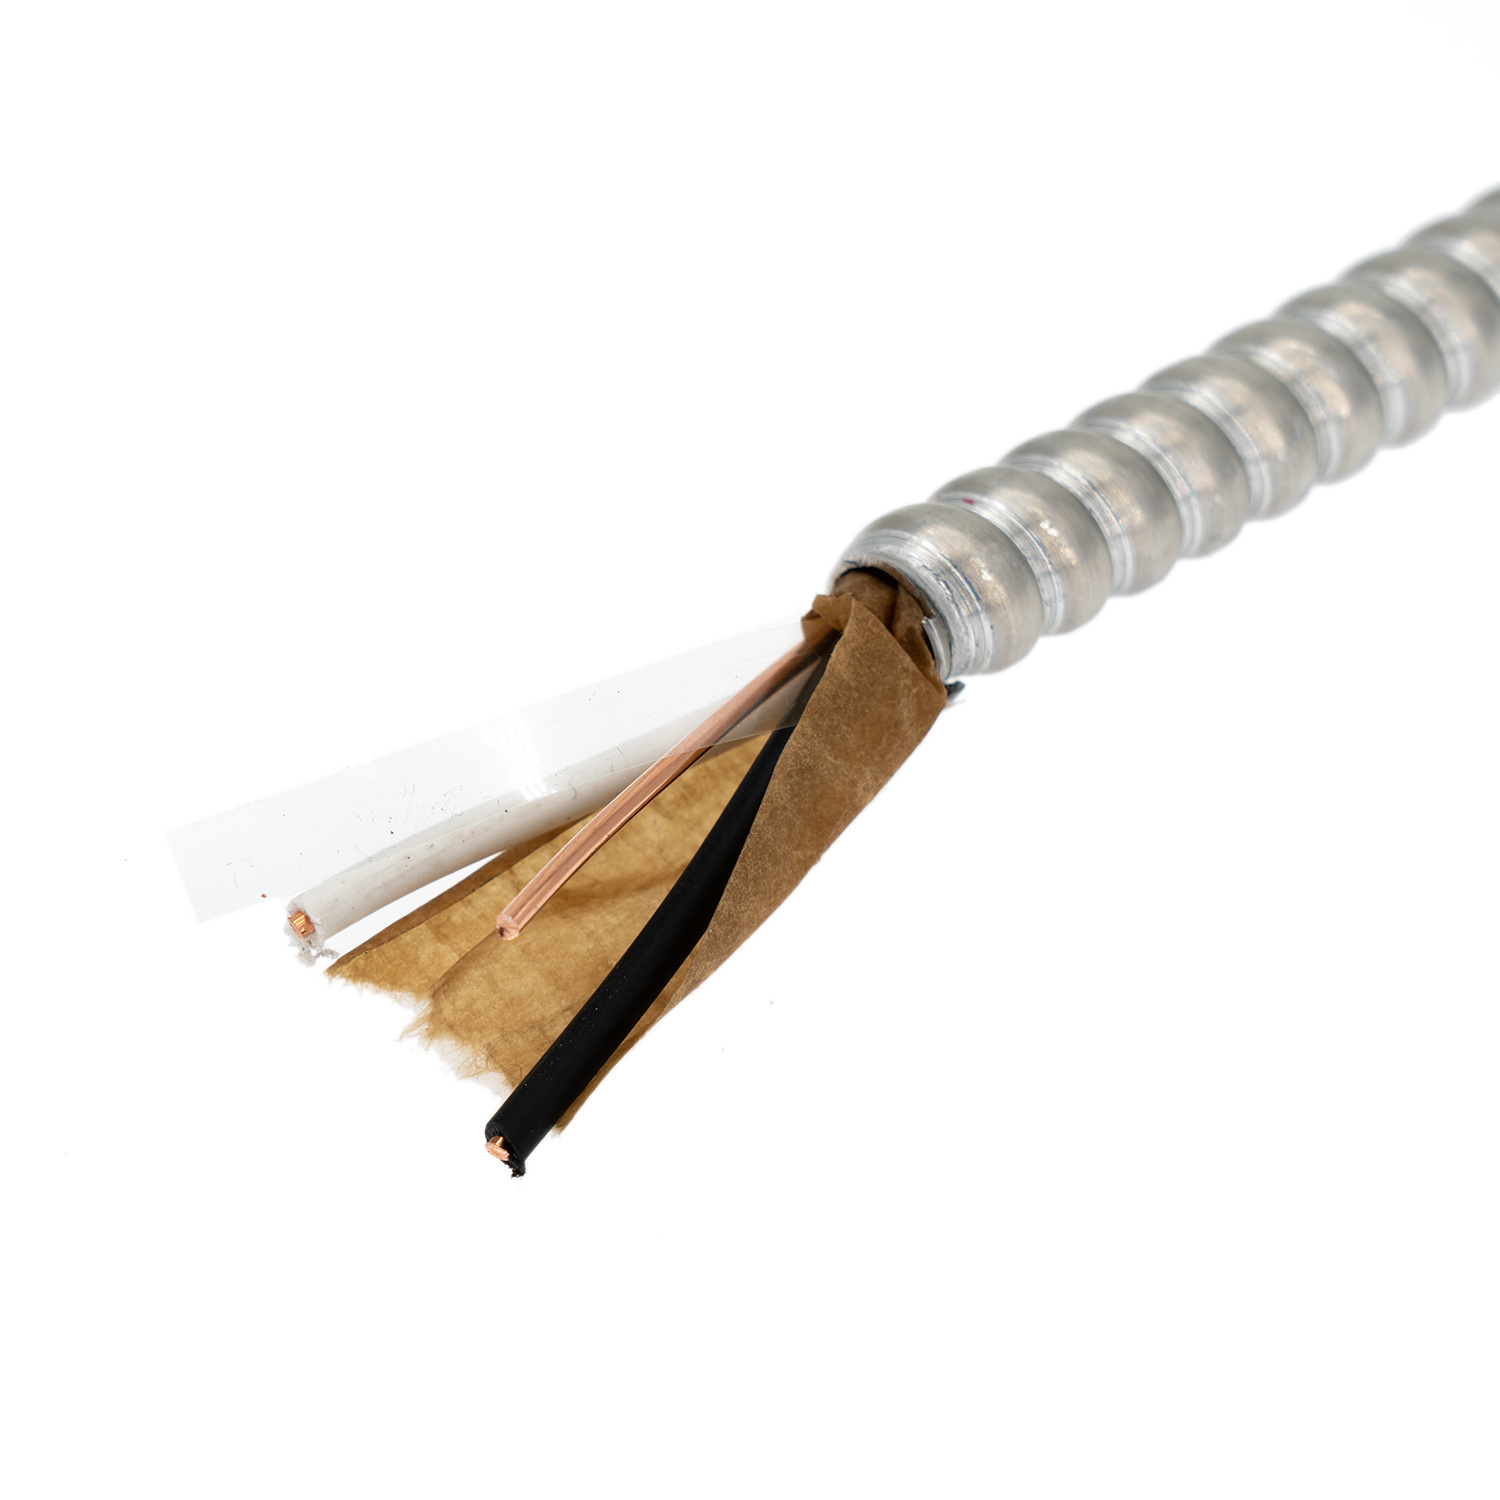 
                UL cUL Certificate Aia Armored AC90 Bx Cable Supplier
            